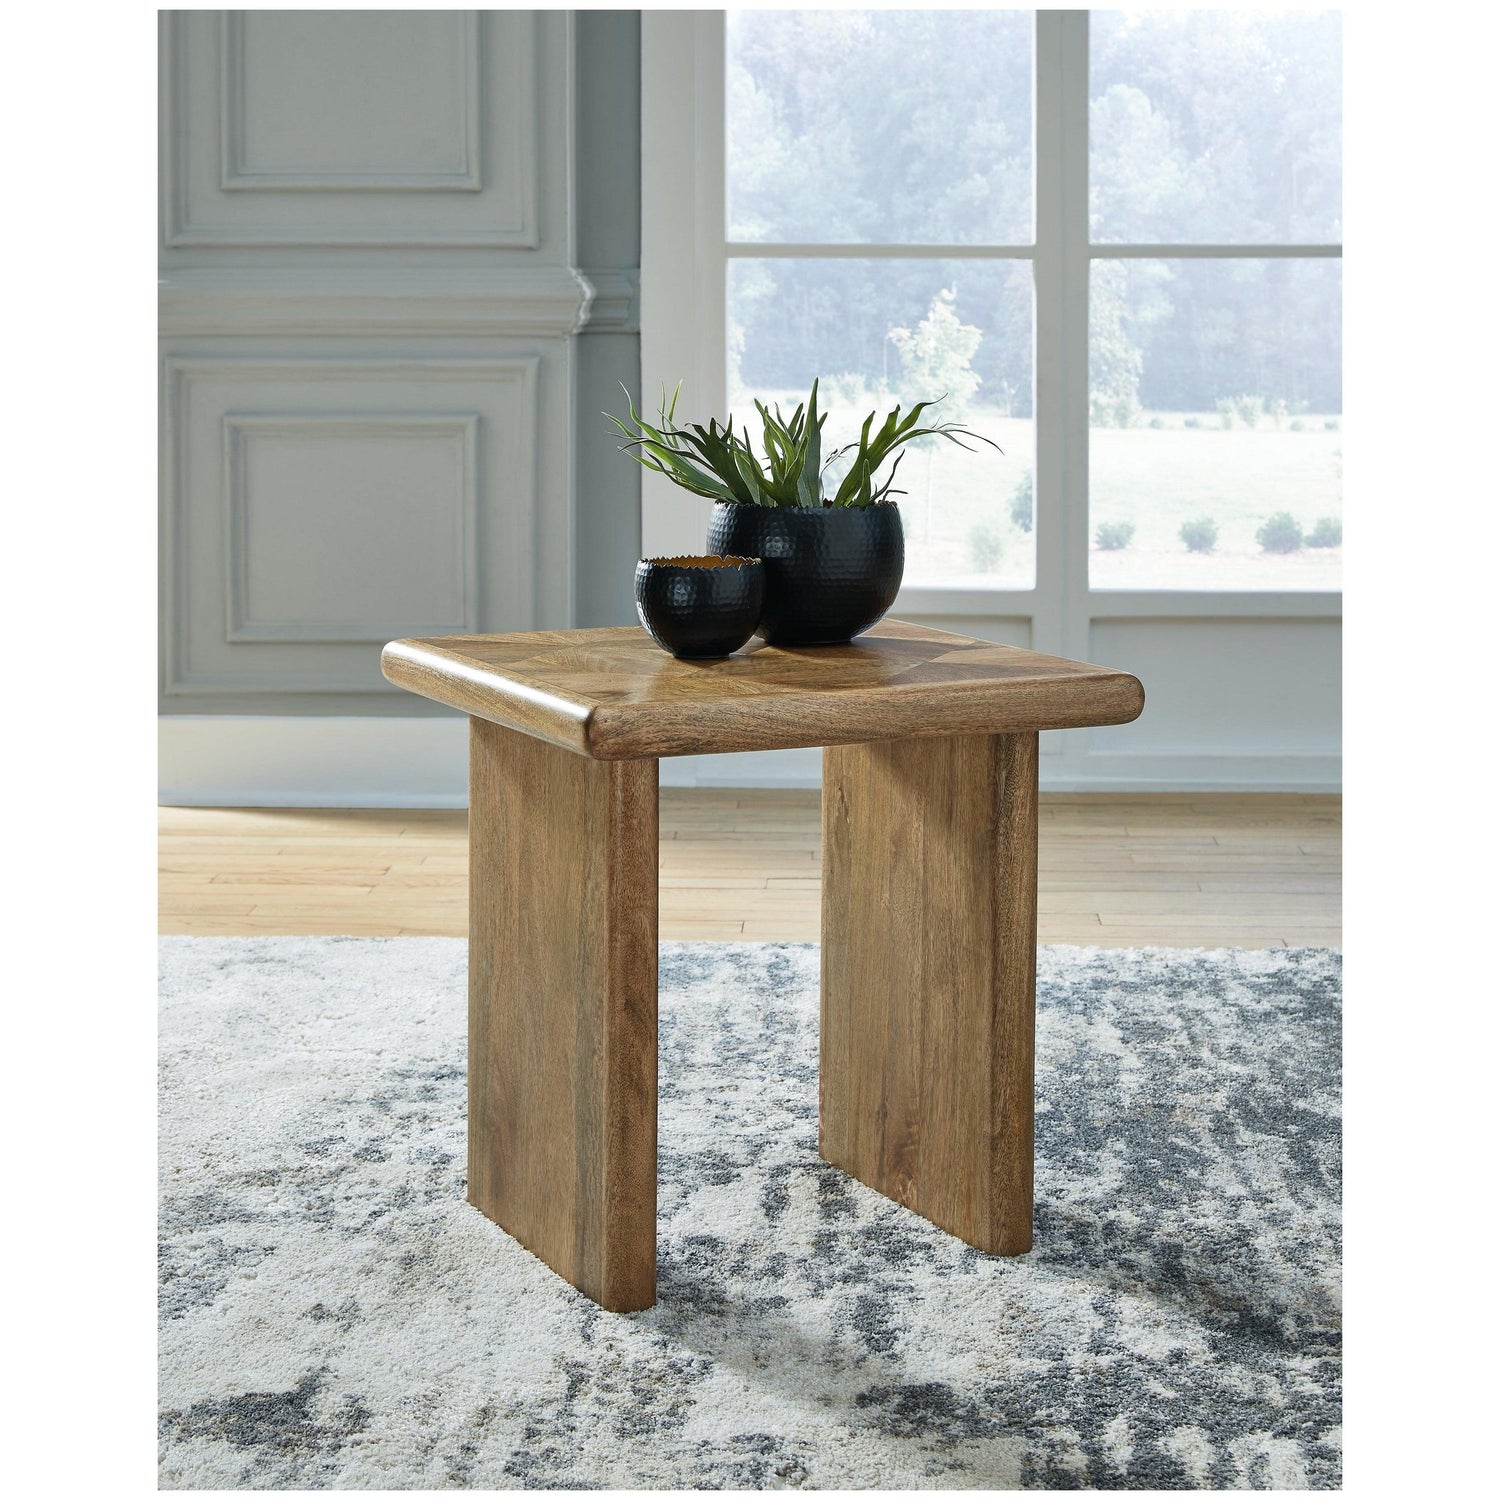 Lawland End Table Ash-T822-2